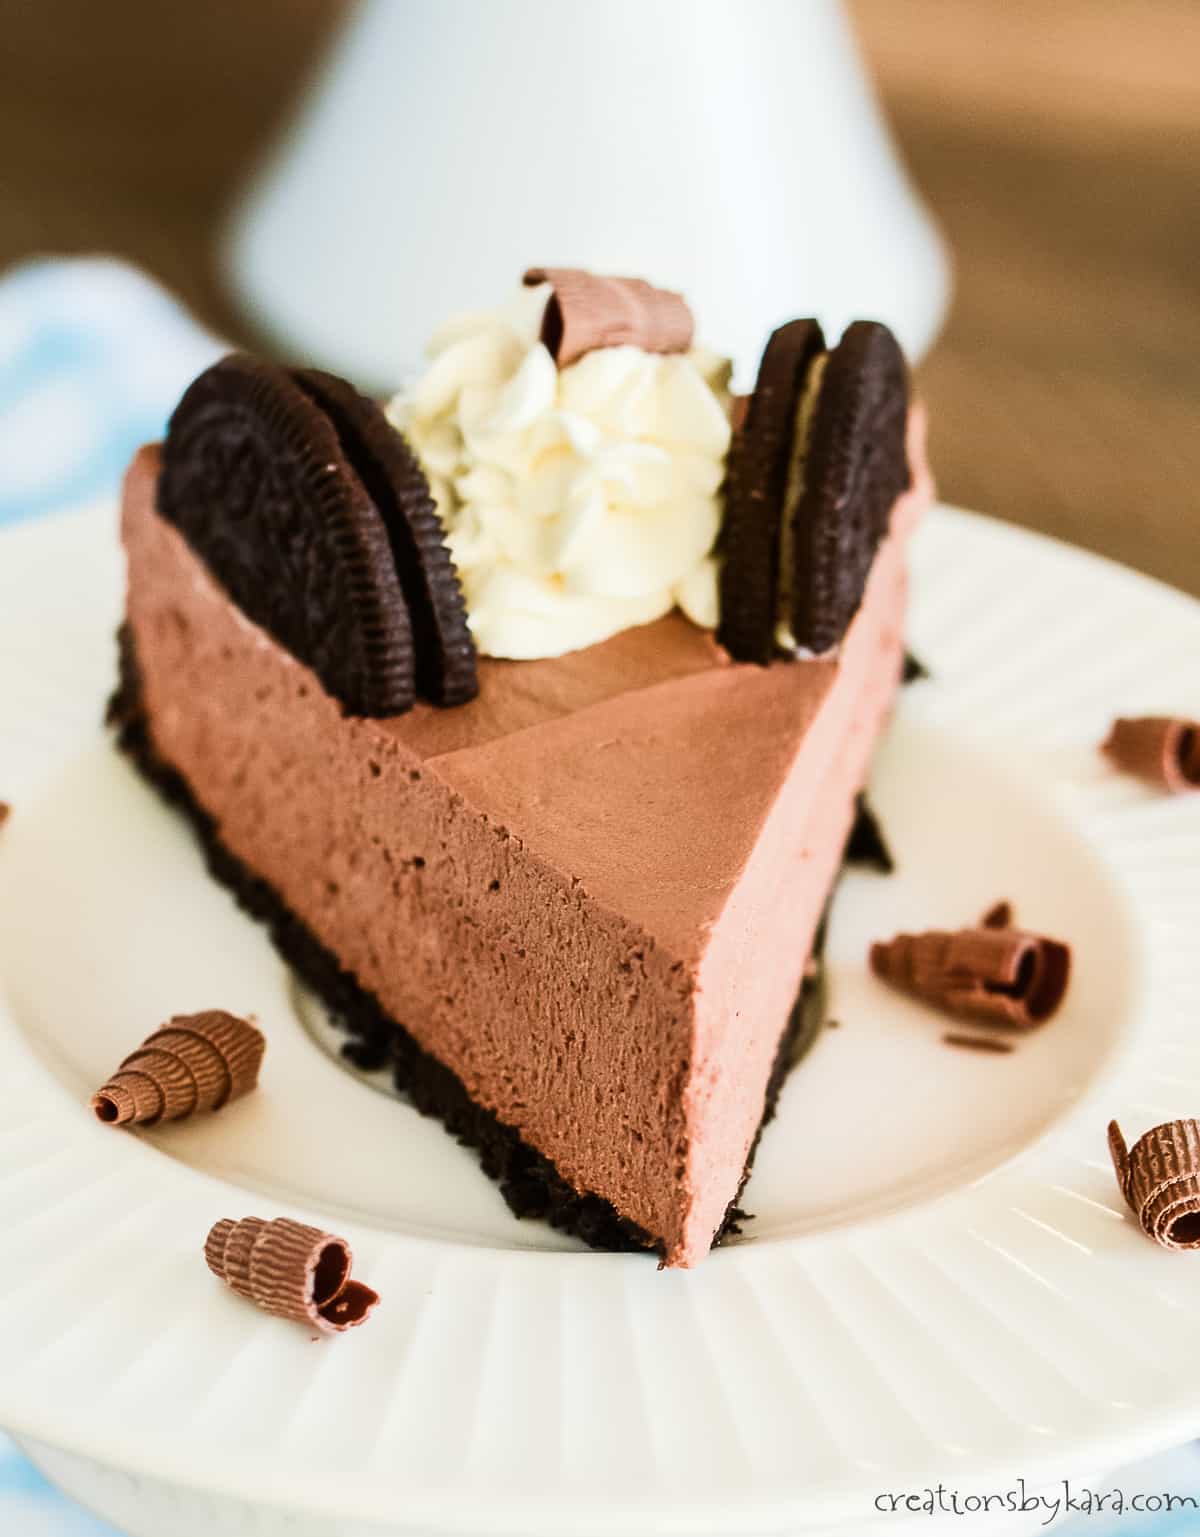 slice of chocolate mousse cake on a plate with chocolate curls